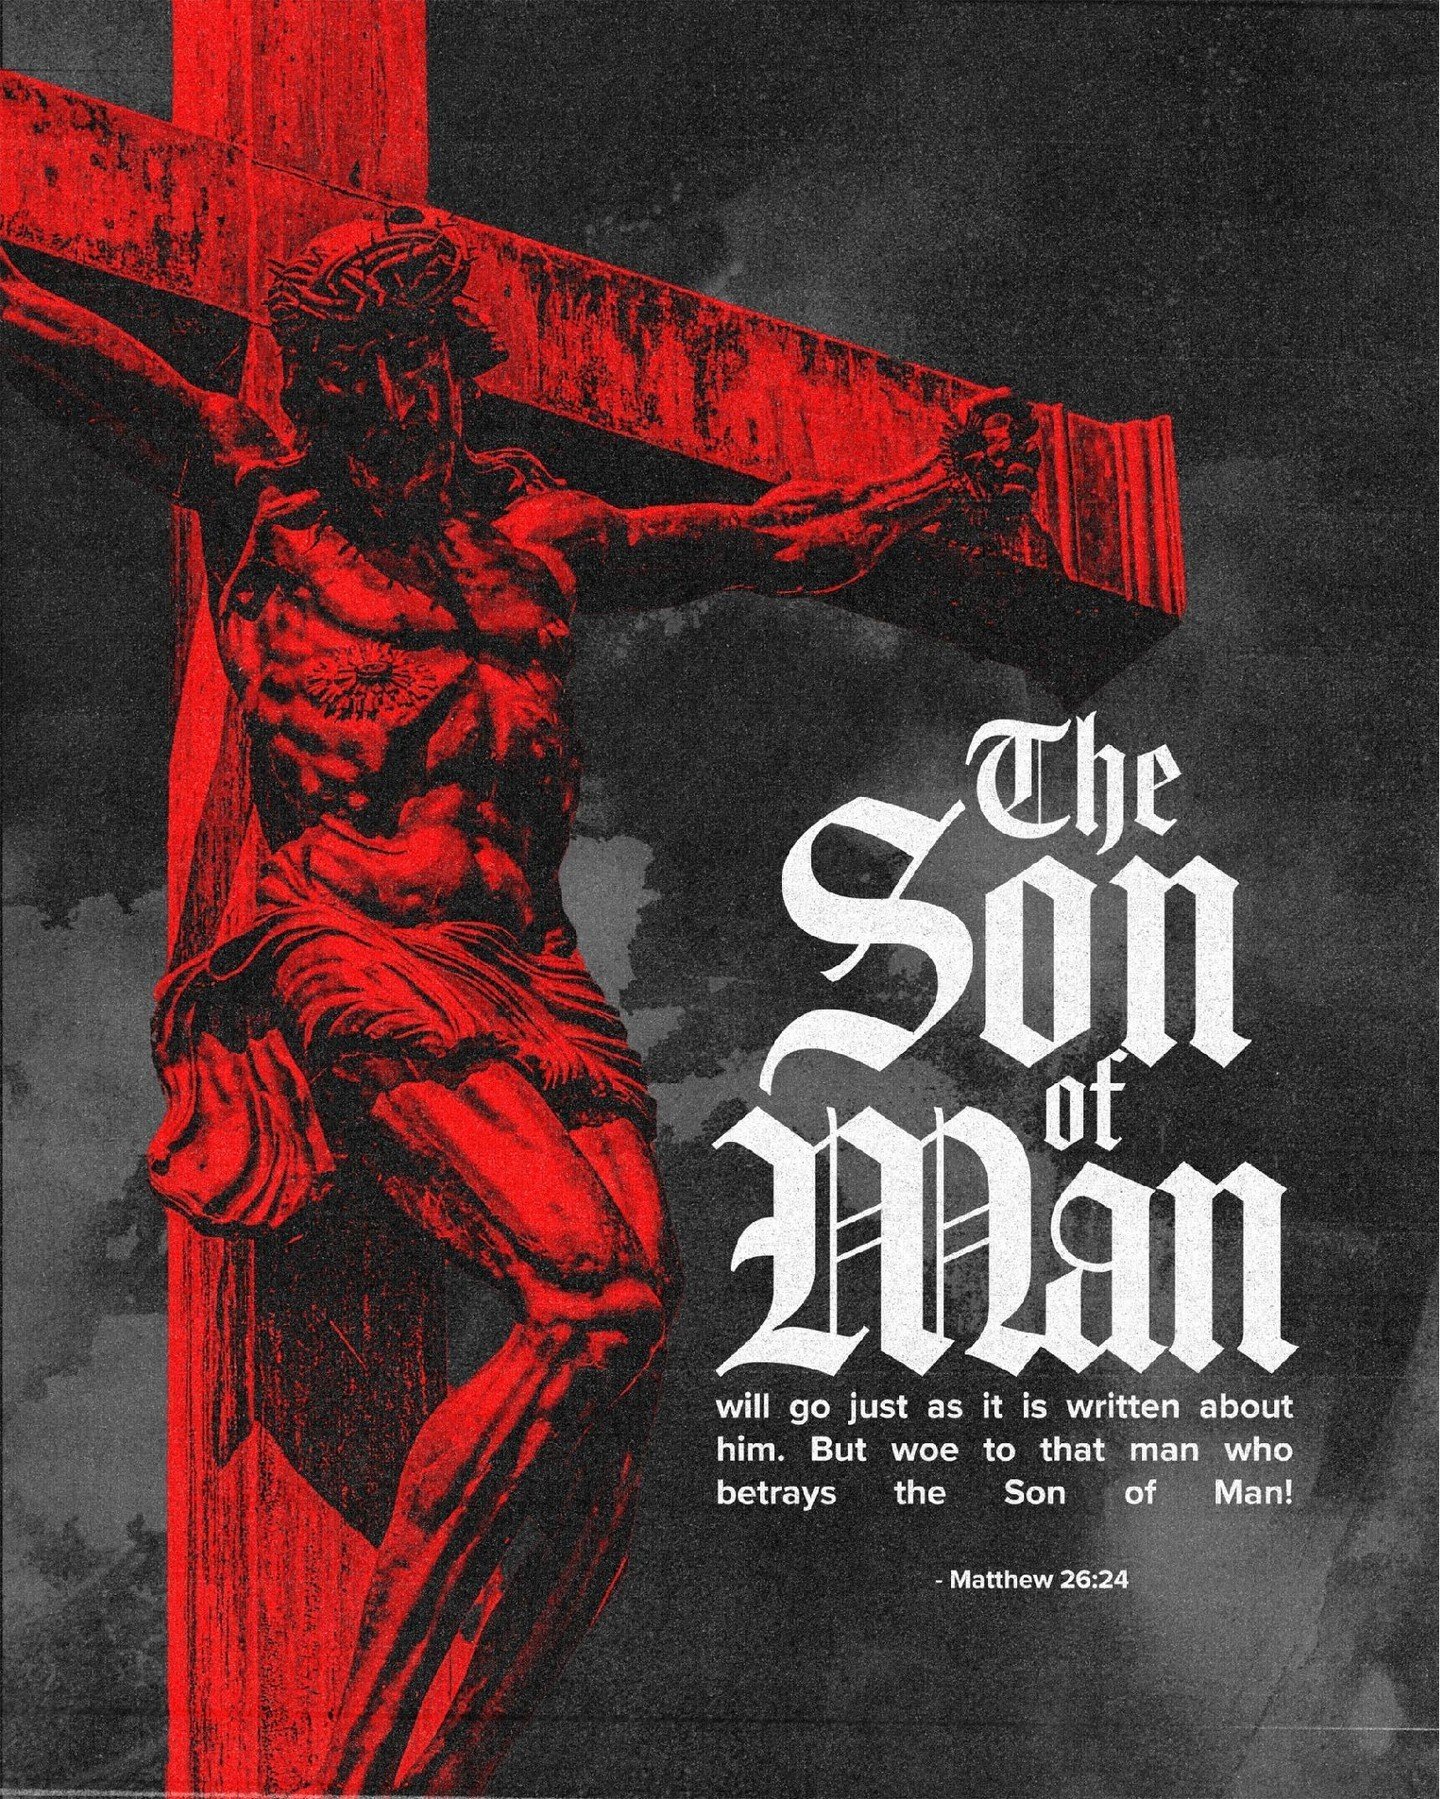 &quot;The Son of Man will go just as it is written about him. But woe to that man who betrays the Son of Man!&quot; - Matthew 26:24
.
.
.
#church #god #morning #jesus #christ #love #christian #worship #bible #matthew